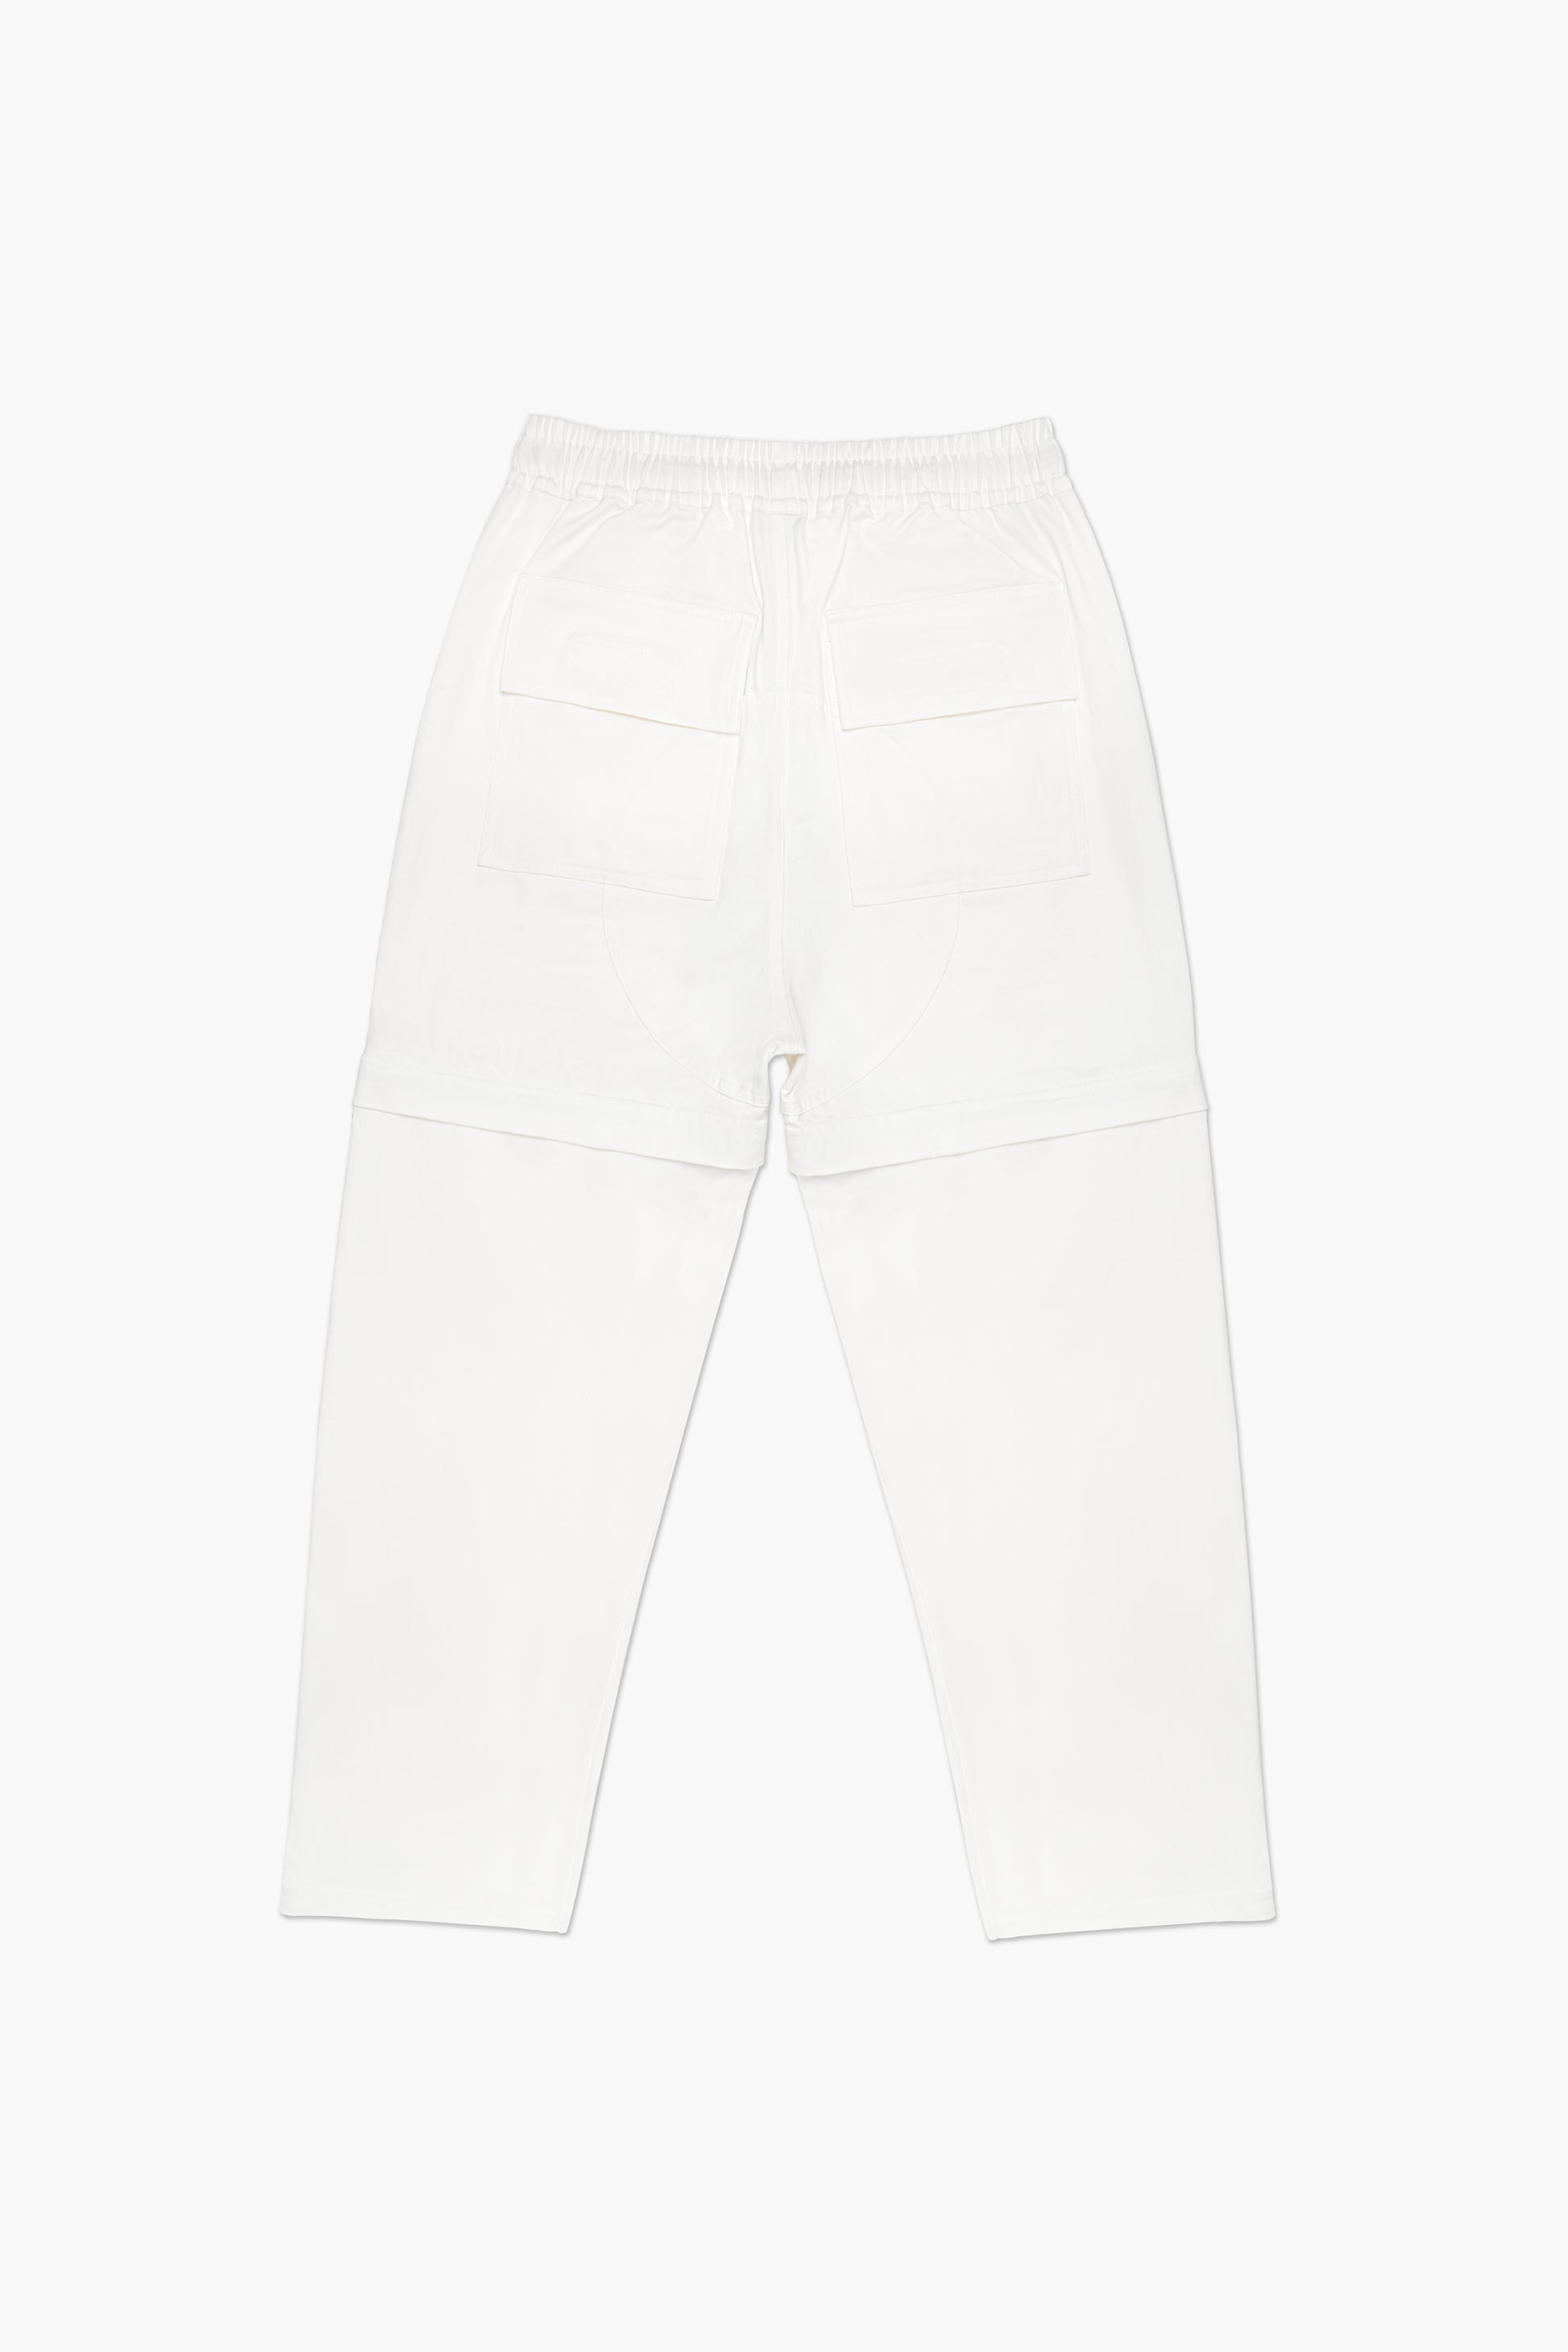 Back of white convertible pants ovnnie